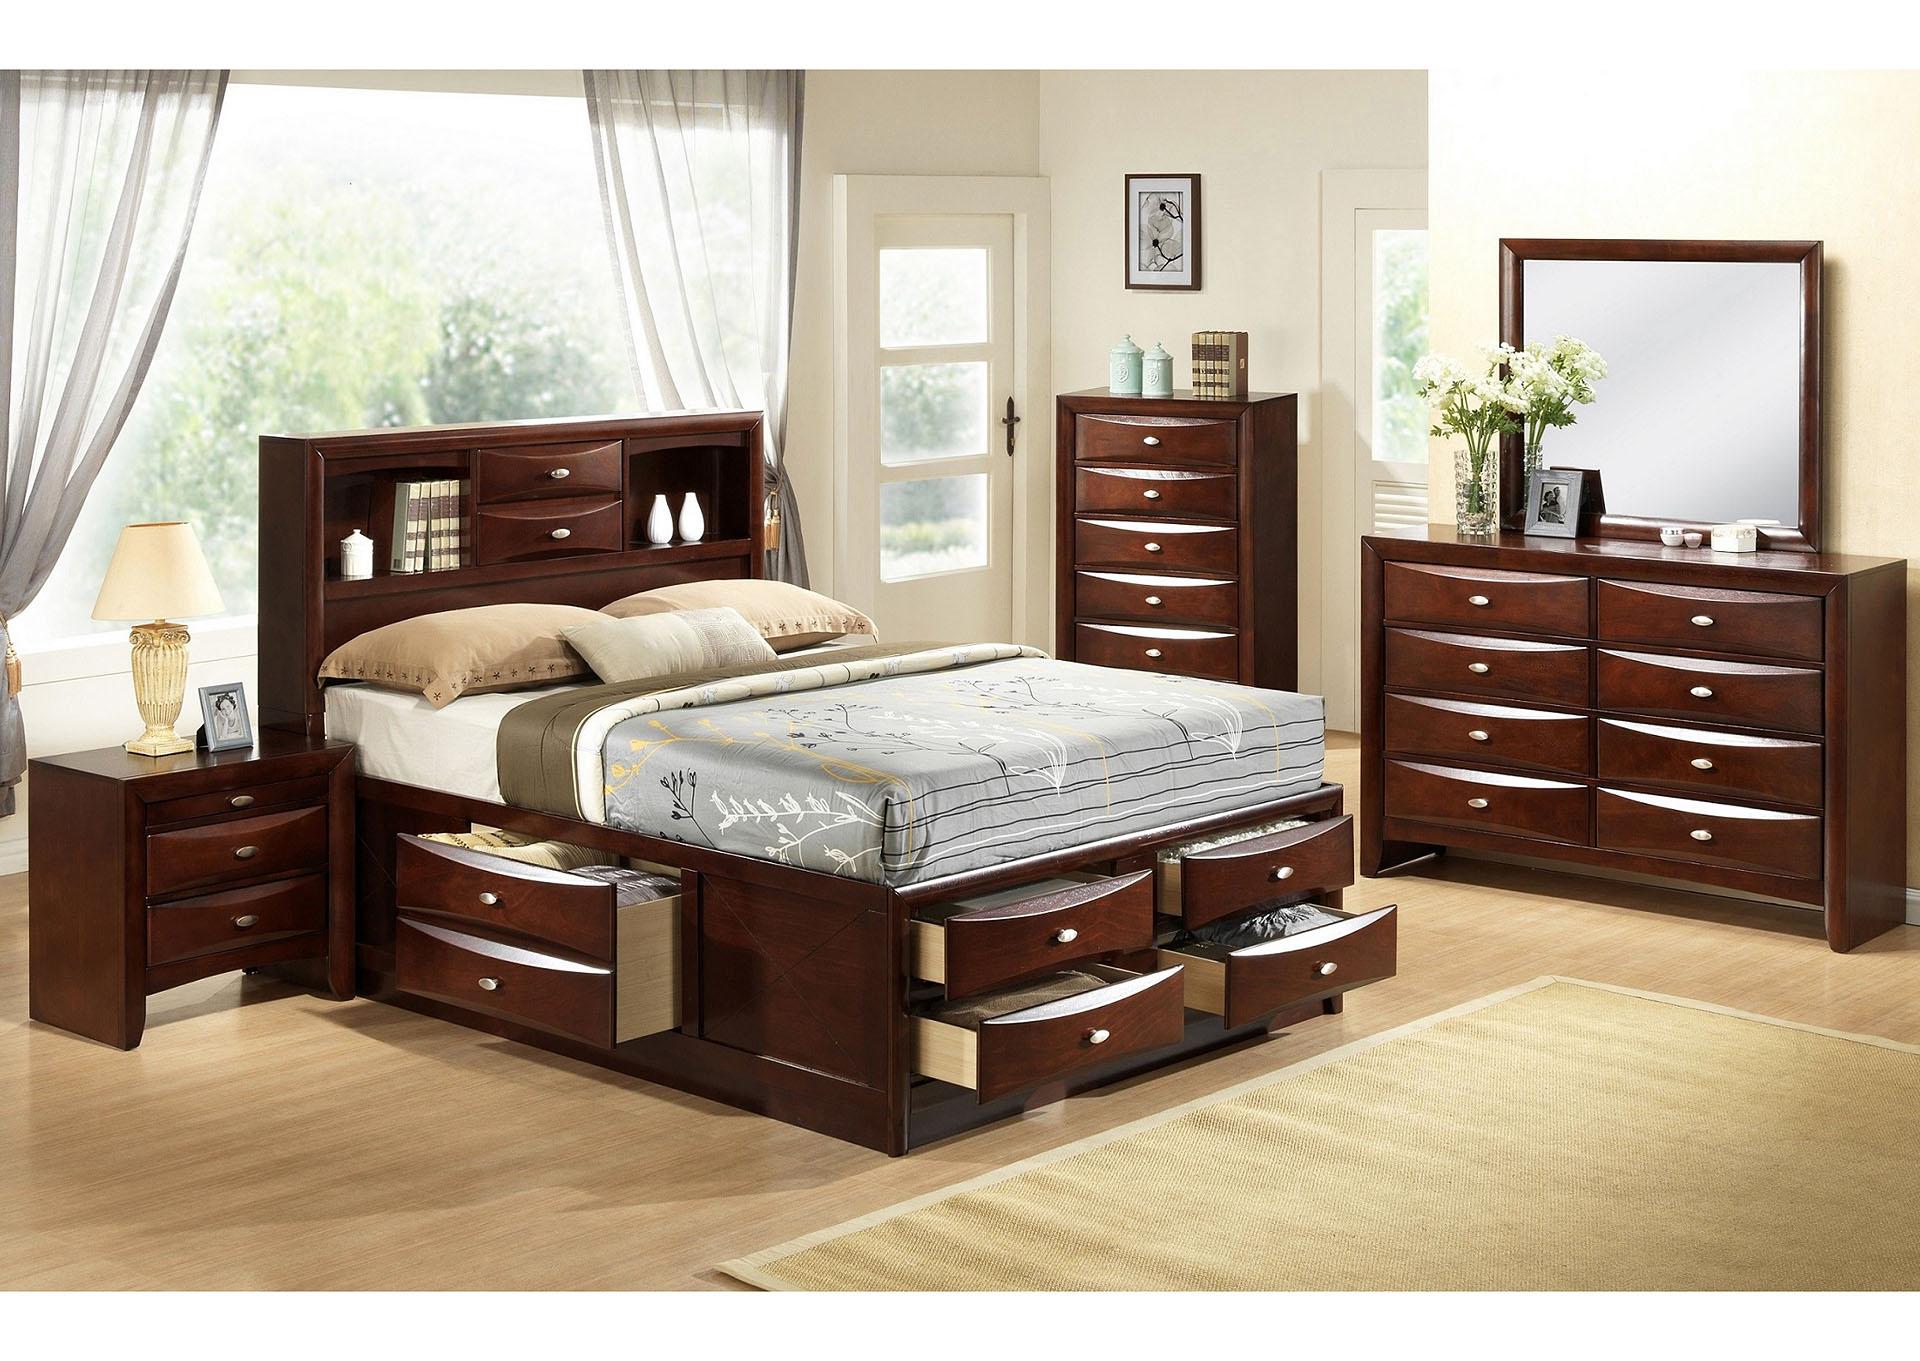 Contemporary, Modern Storage Bedroom Set EMILY GHF-808857567017 in Cherry 